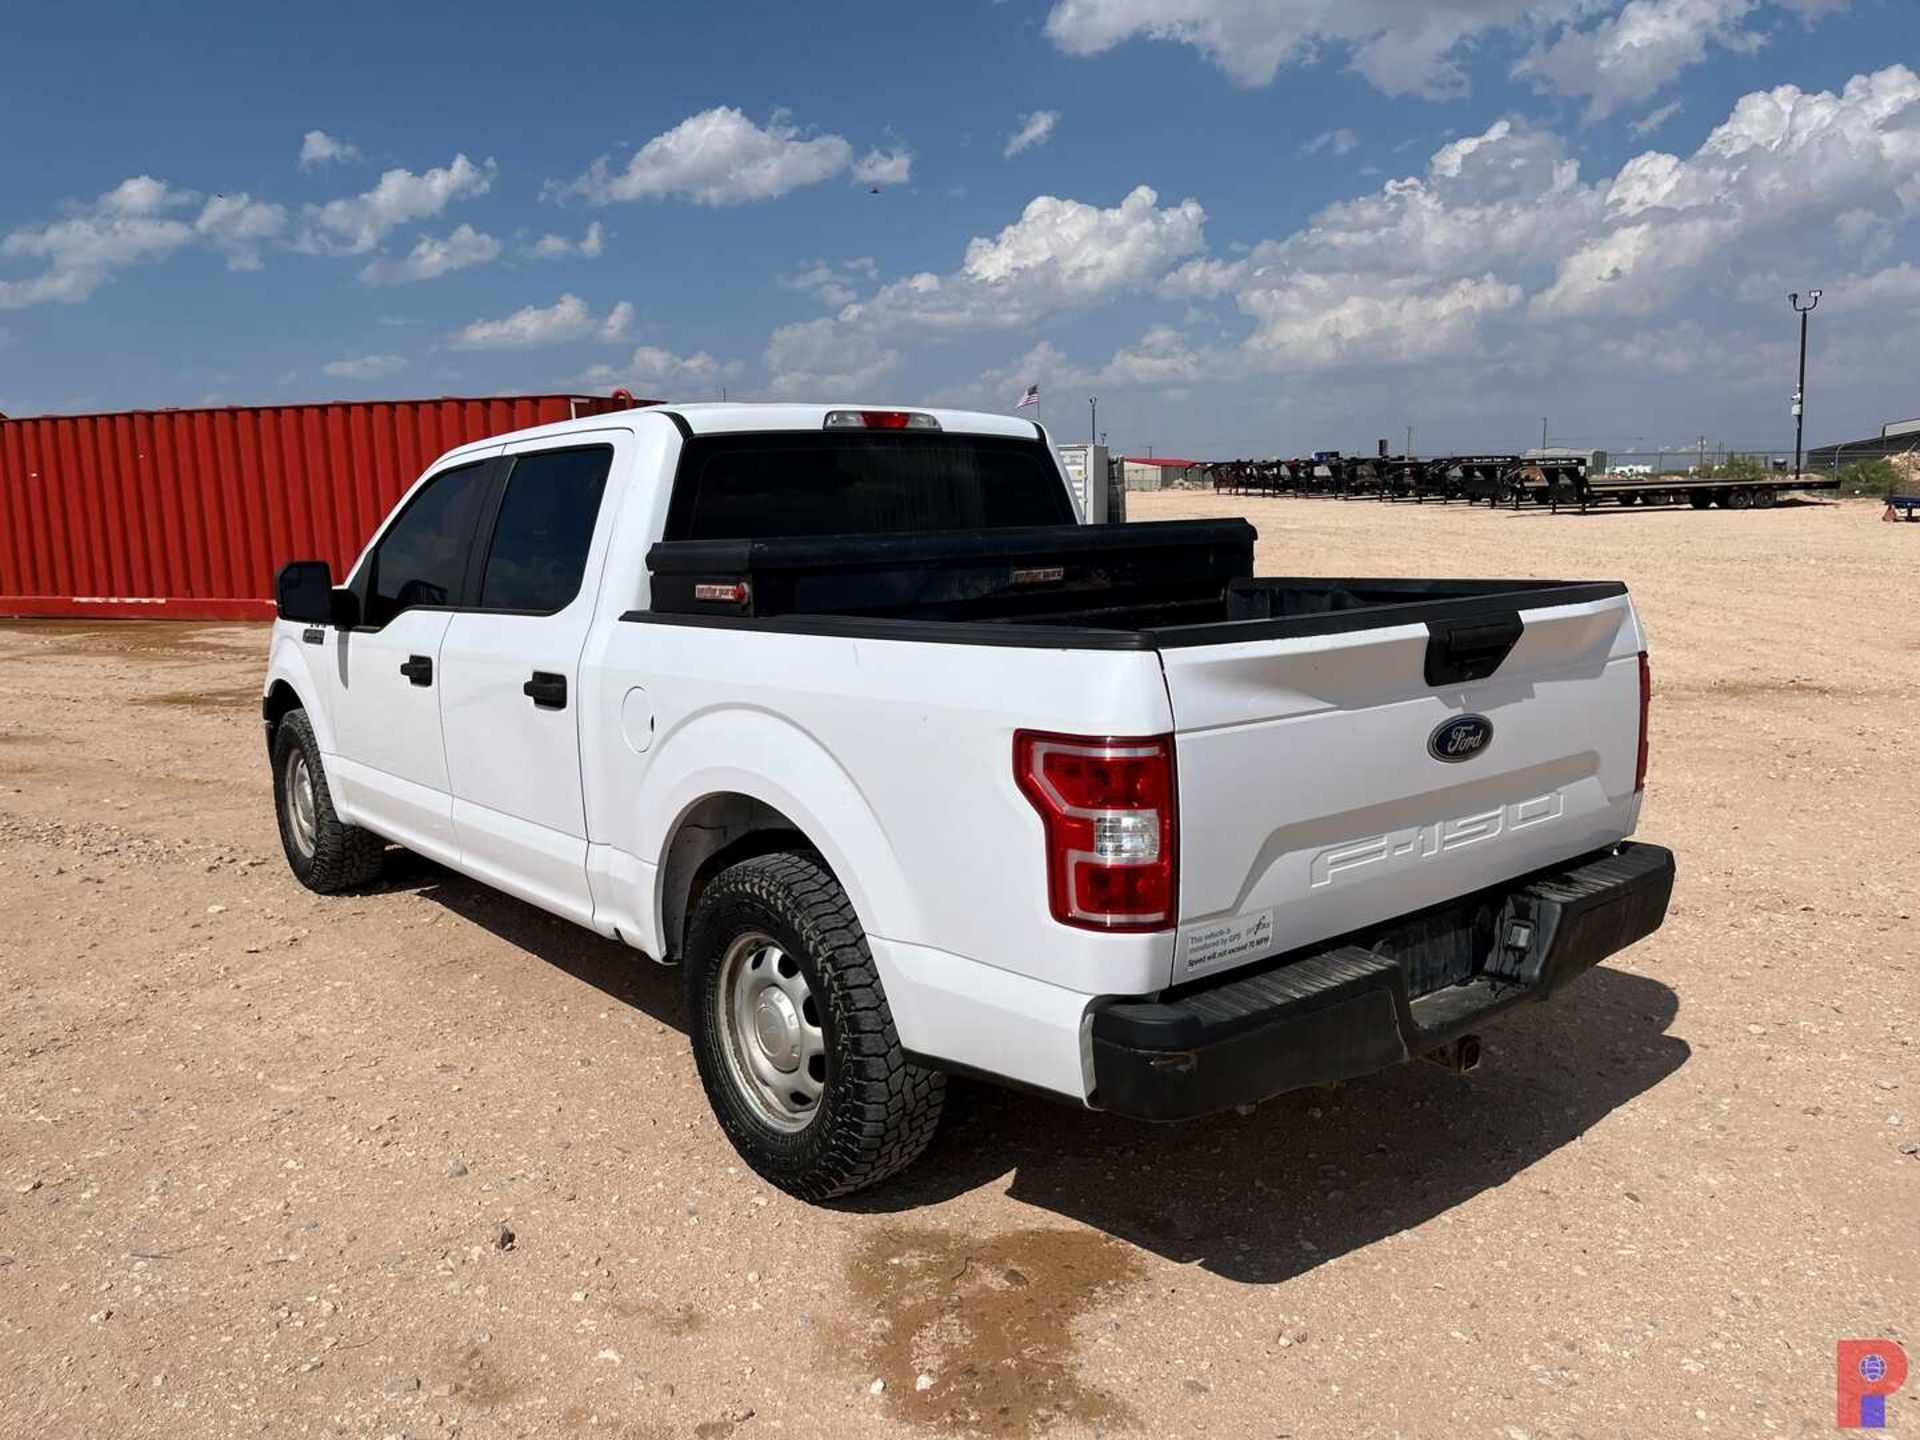 2018 FORD F-150 CREW CAB PICKUP TRUCK - Image 4 of 7